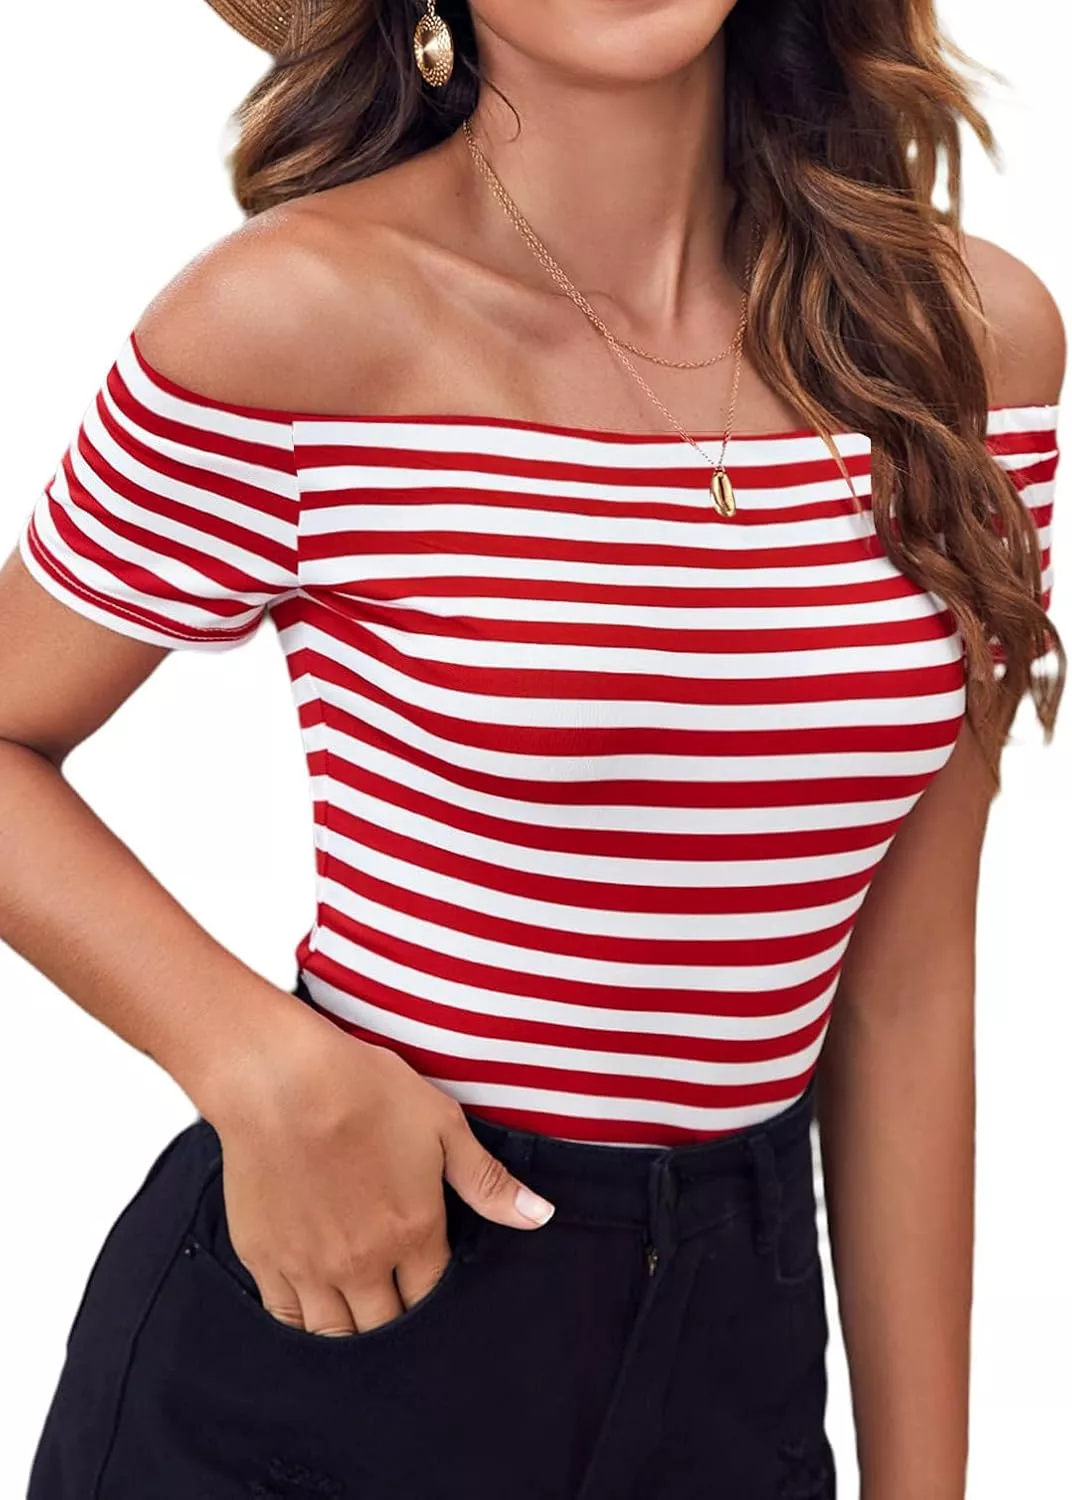 LilyCoco Women's Off The Shoulder Bodysuit Sexy Short Sleeve